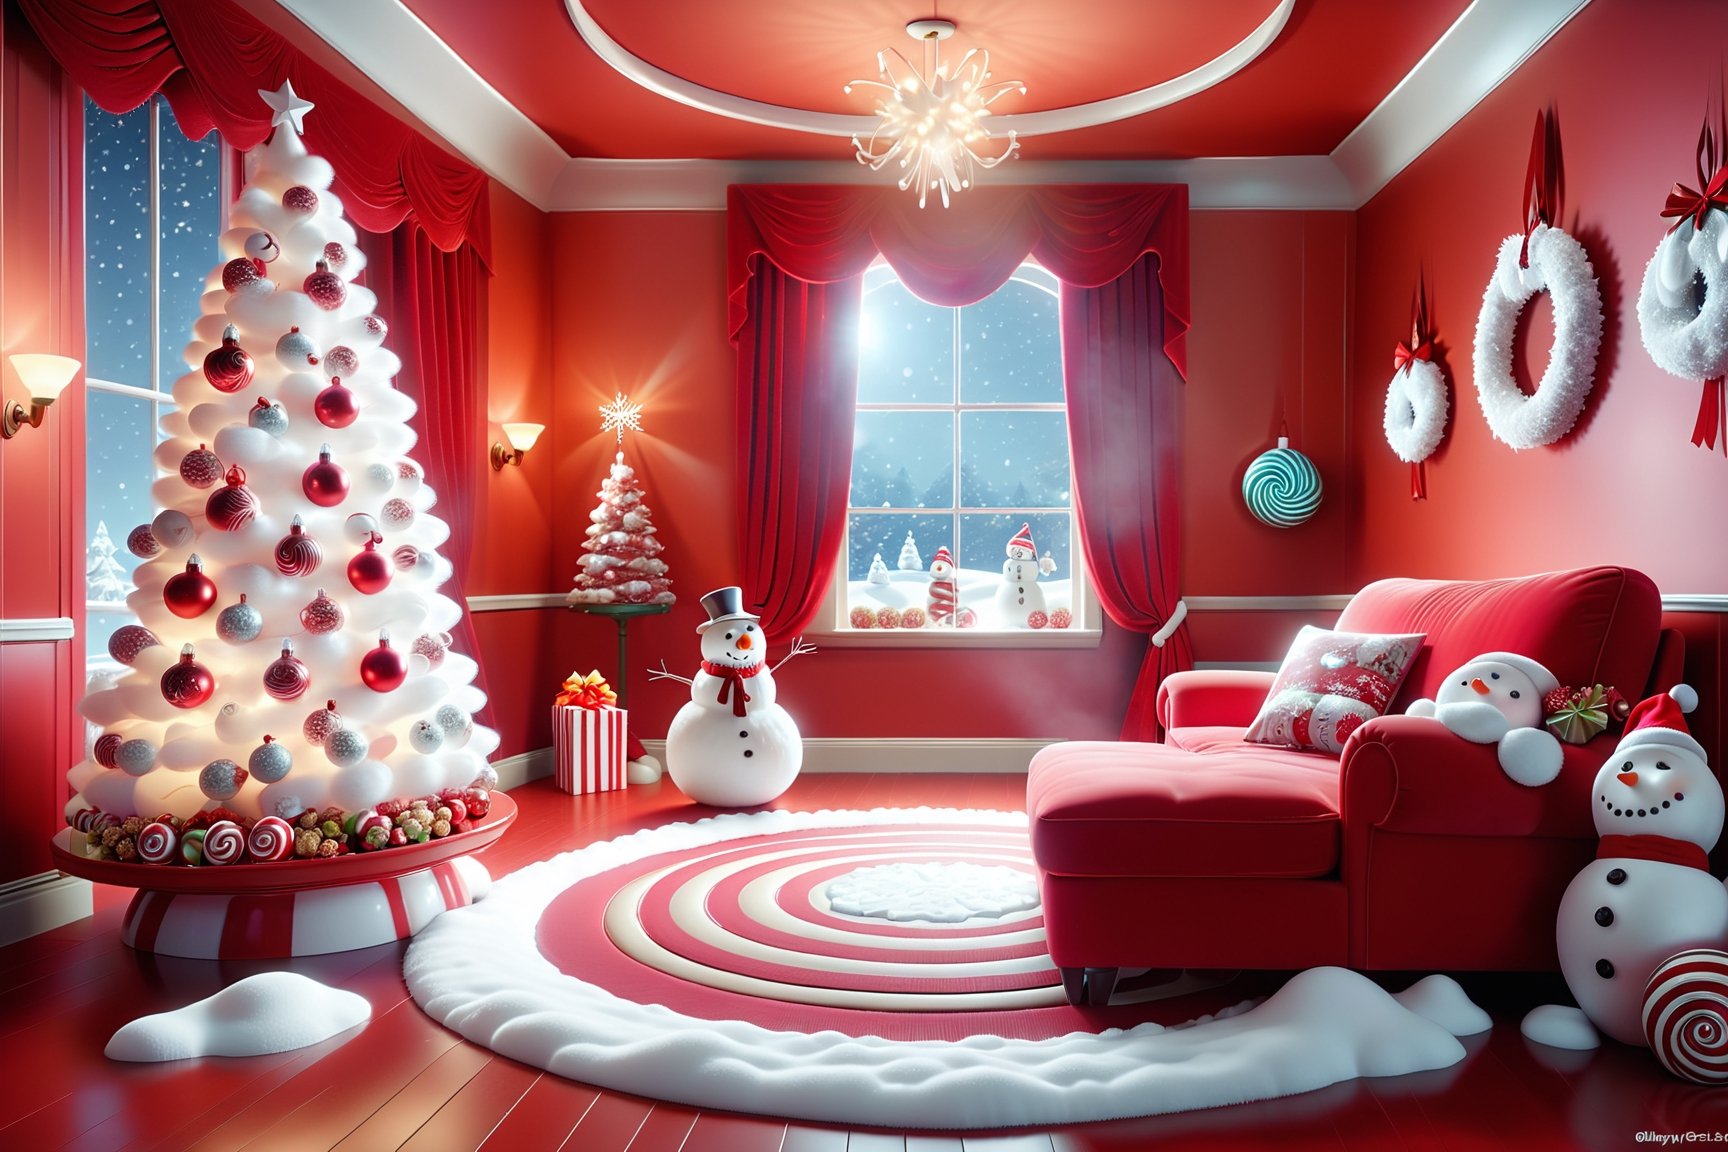 Best quality,masterpiece,ultra high res,christmas decorations in a red room with christmas candy and snowmen, in the style of rendered in cinema4d, glowwave, sketchfab, realistic scenes, hyper-realistic, storybook-like